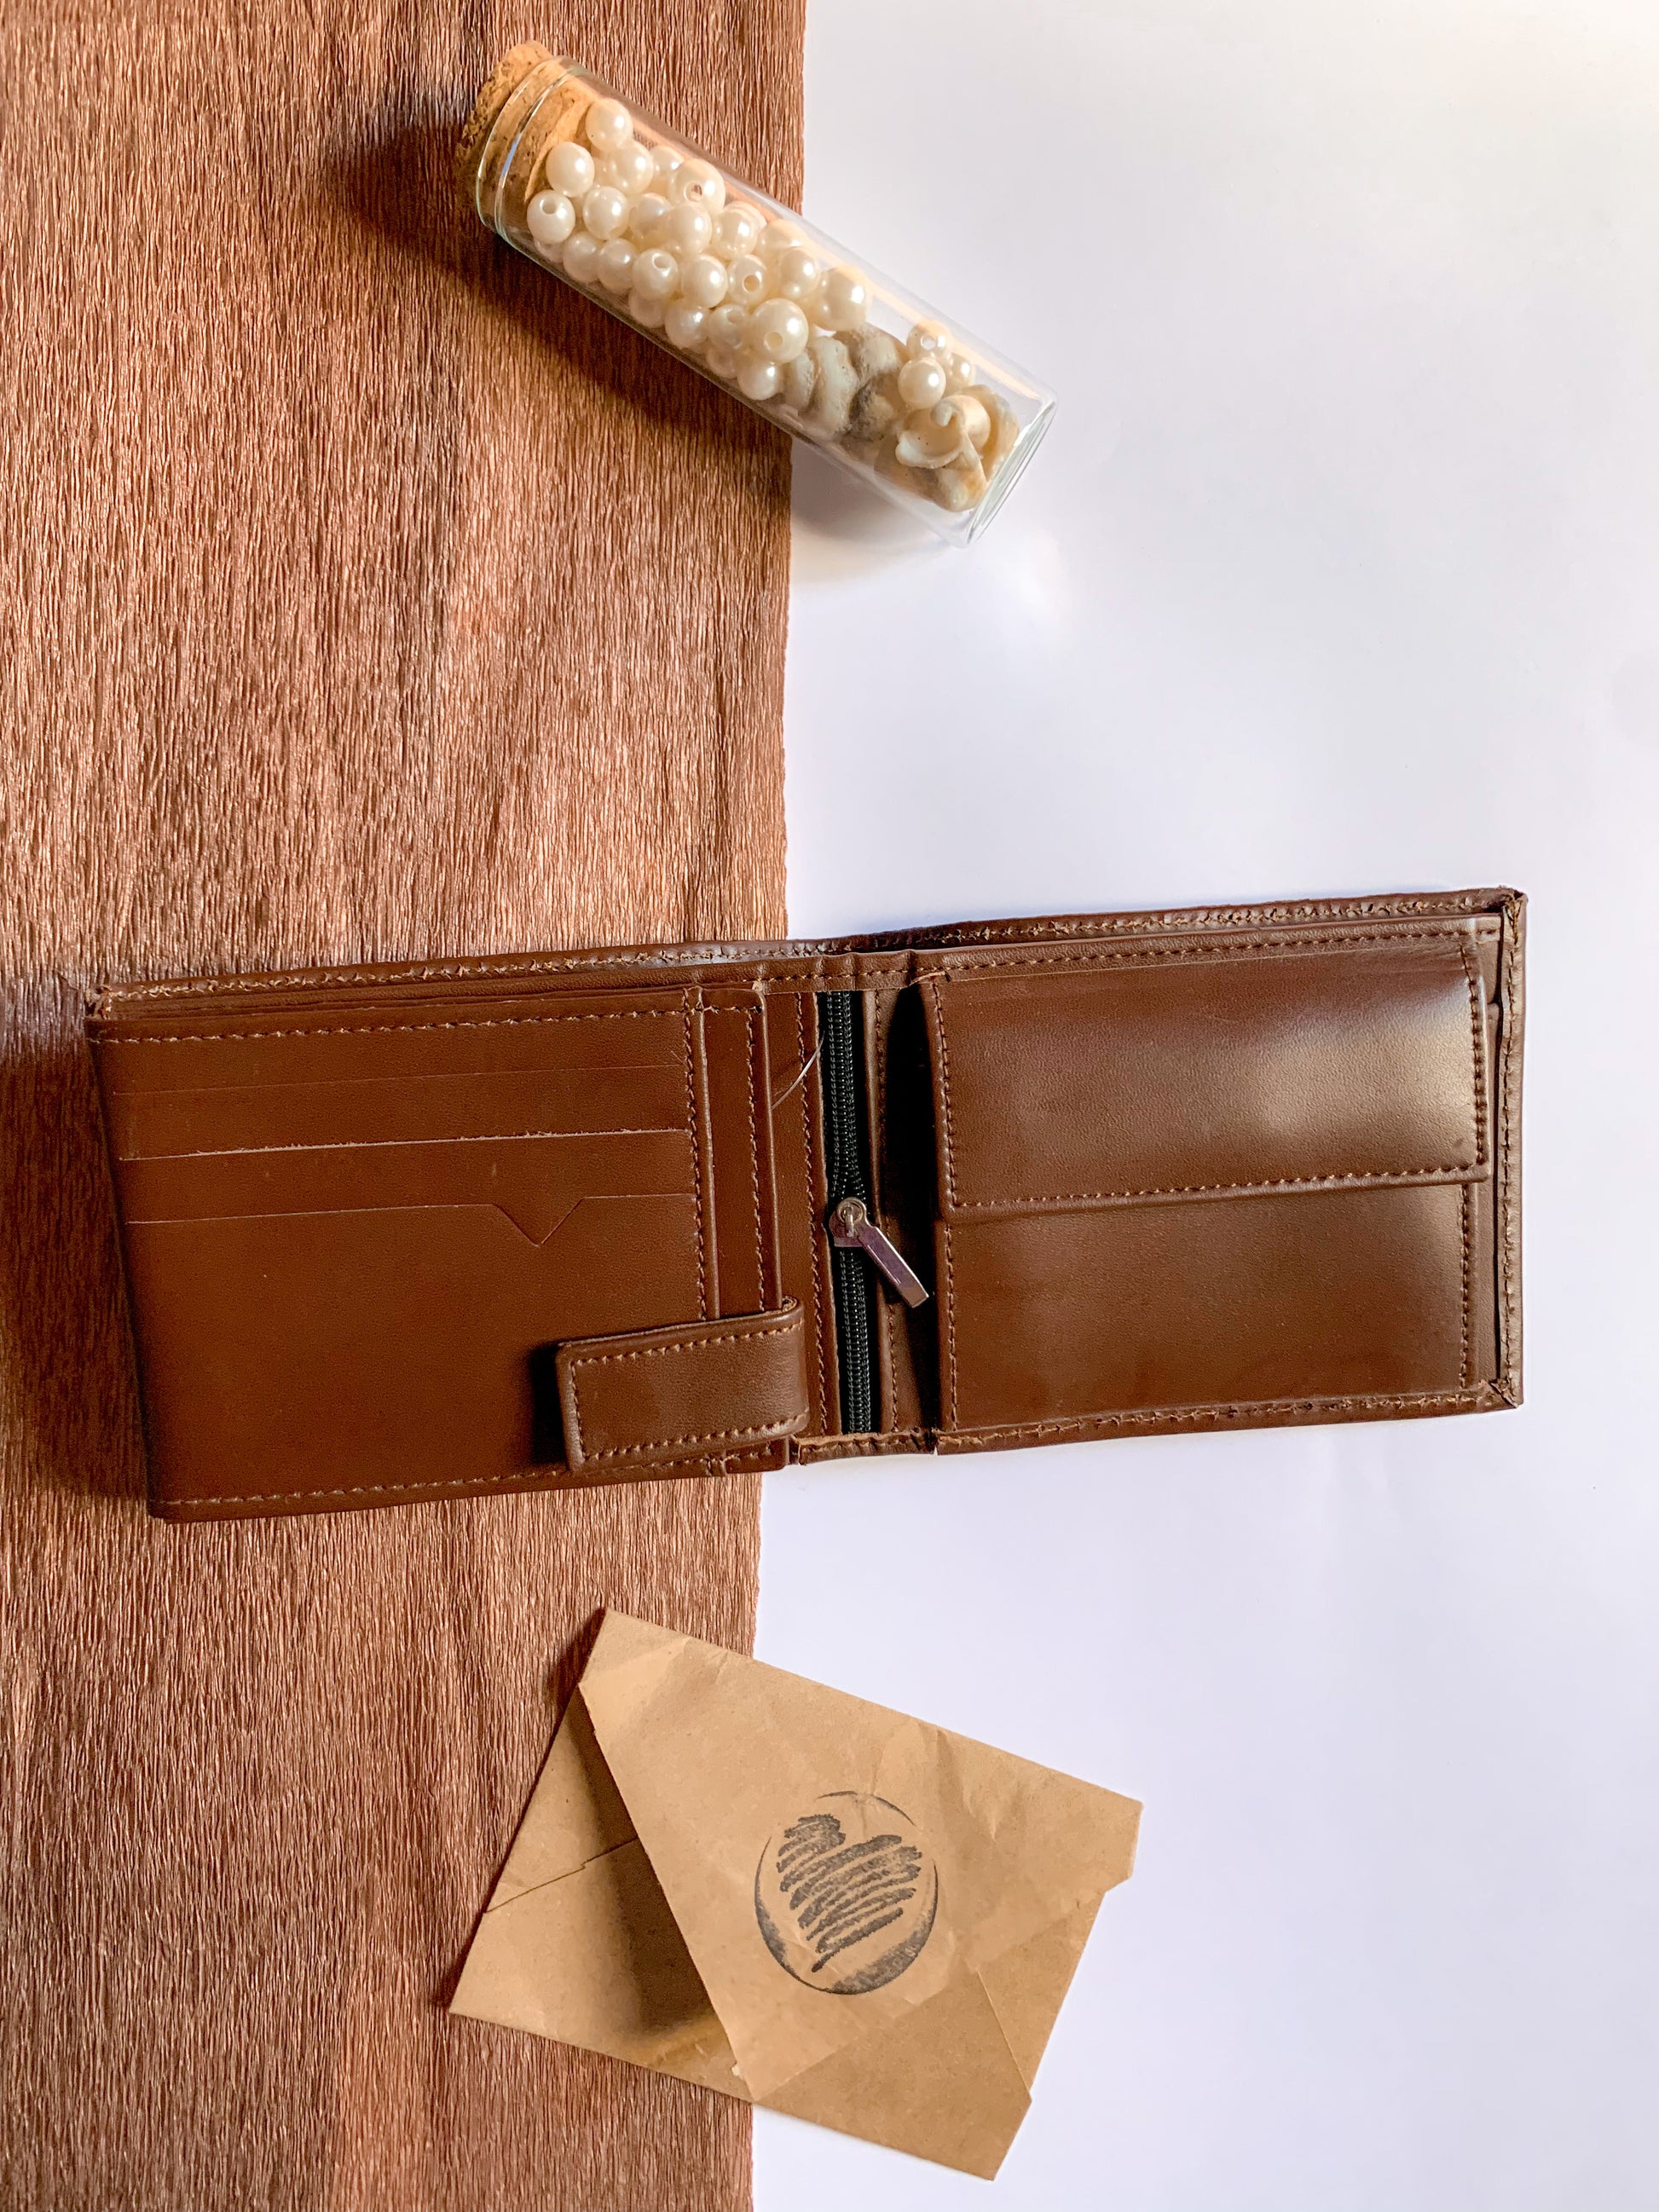 Buy Pure Leather Wallet For Men - Trifold Brown in Pakistan